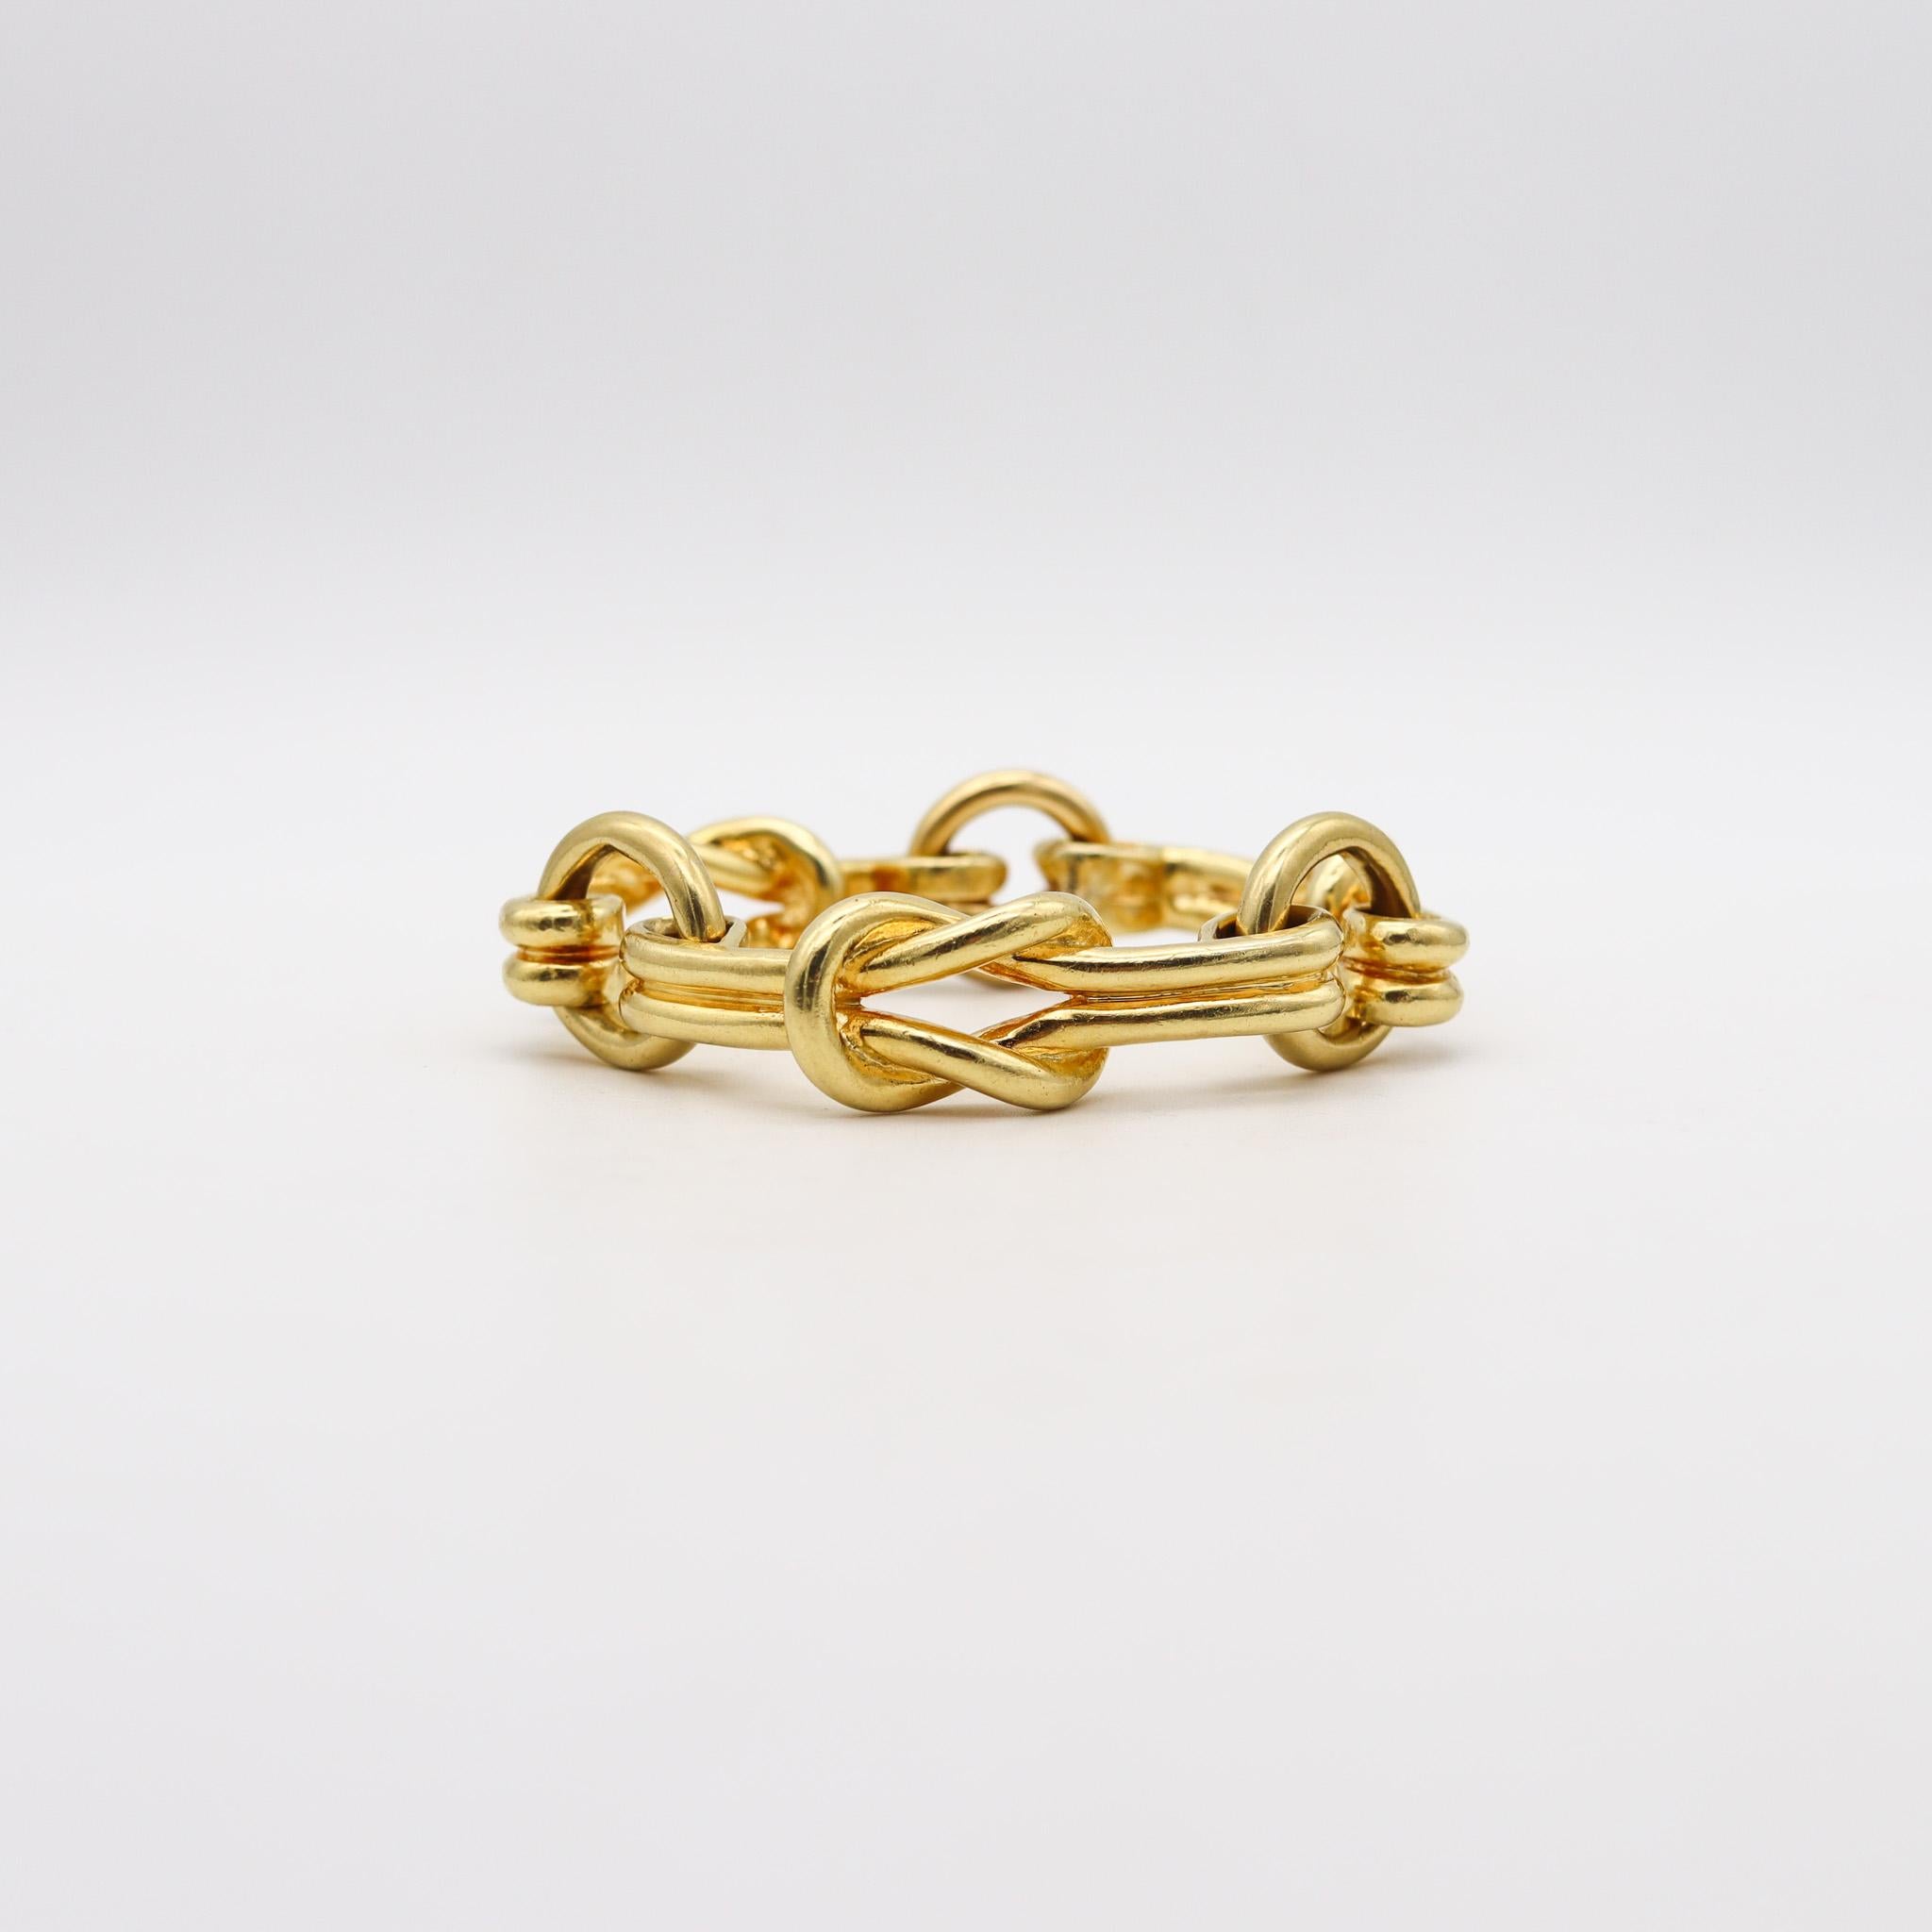 Modernist Cartier 1970 Hercules Knots Statement Links Bracelet In Solid 18Kt Yellow Gold For Sale